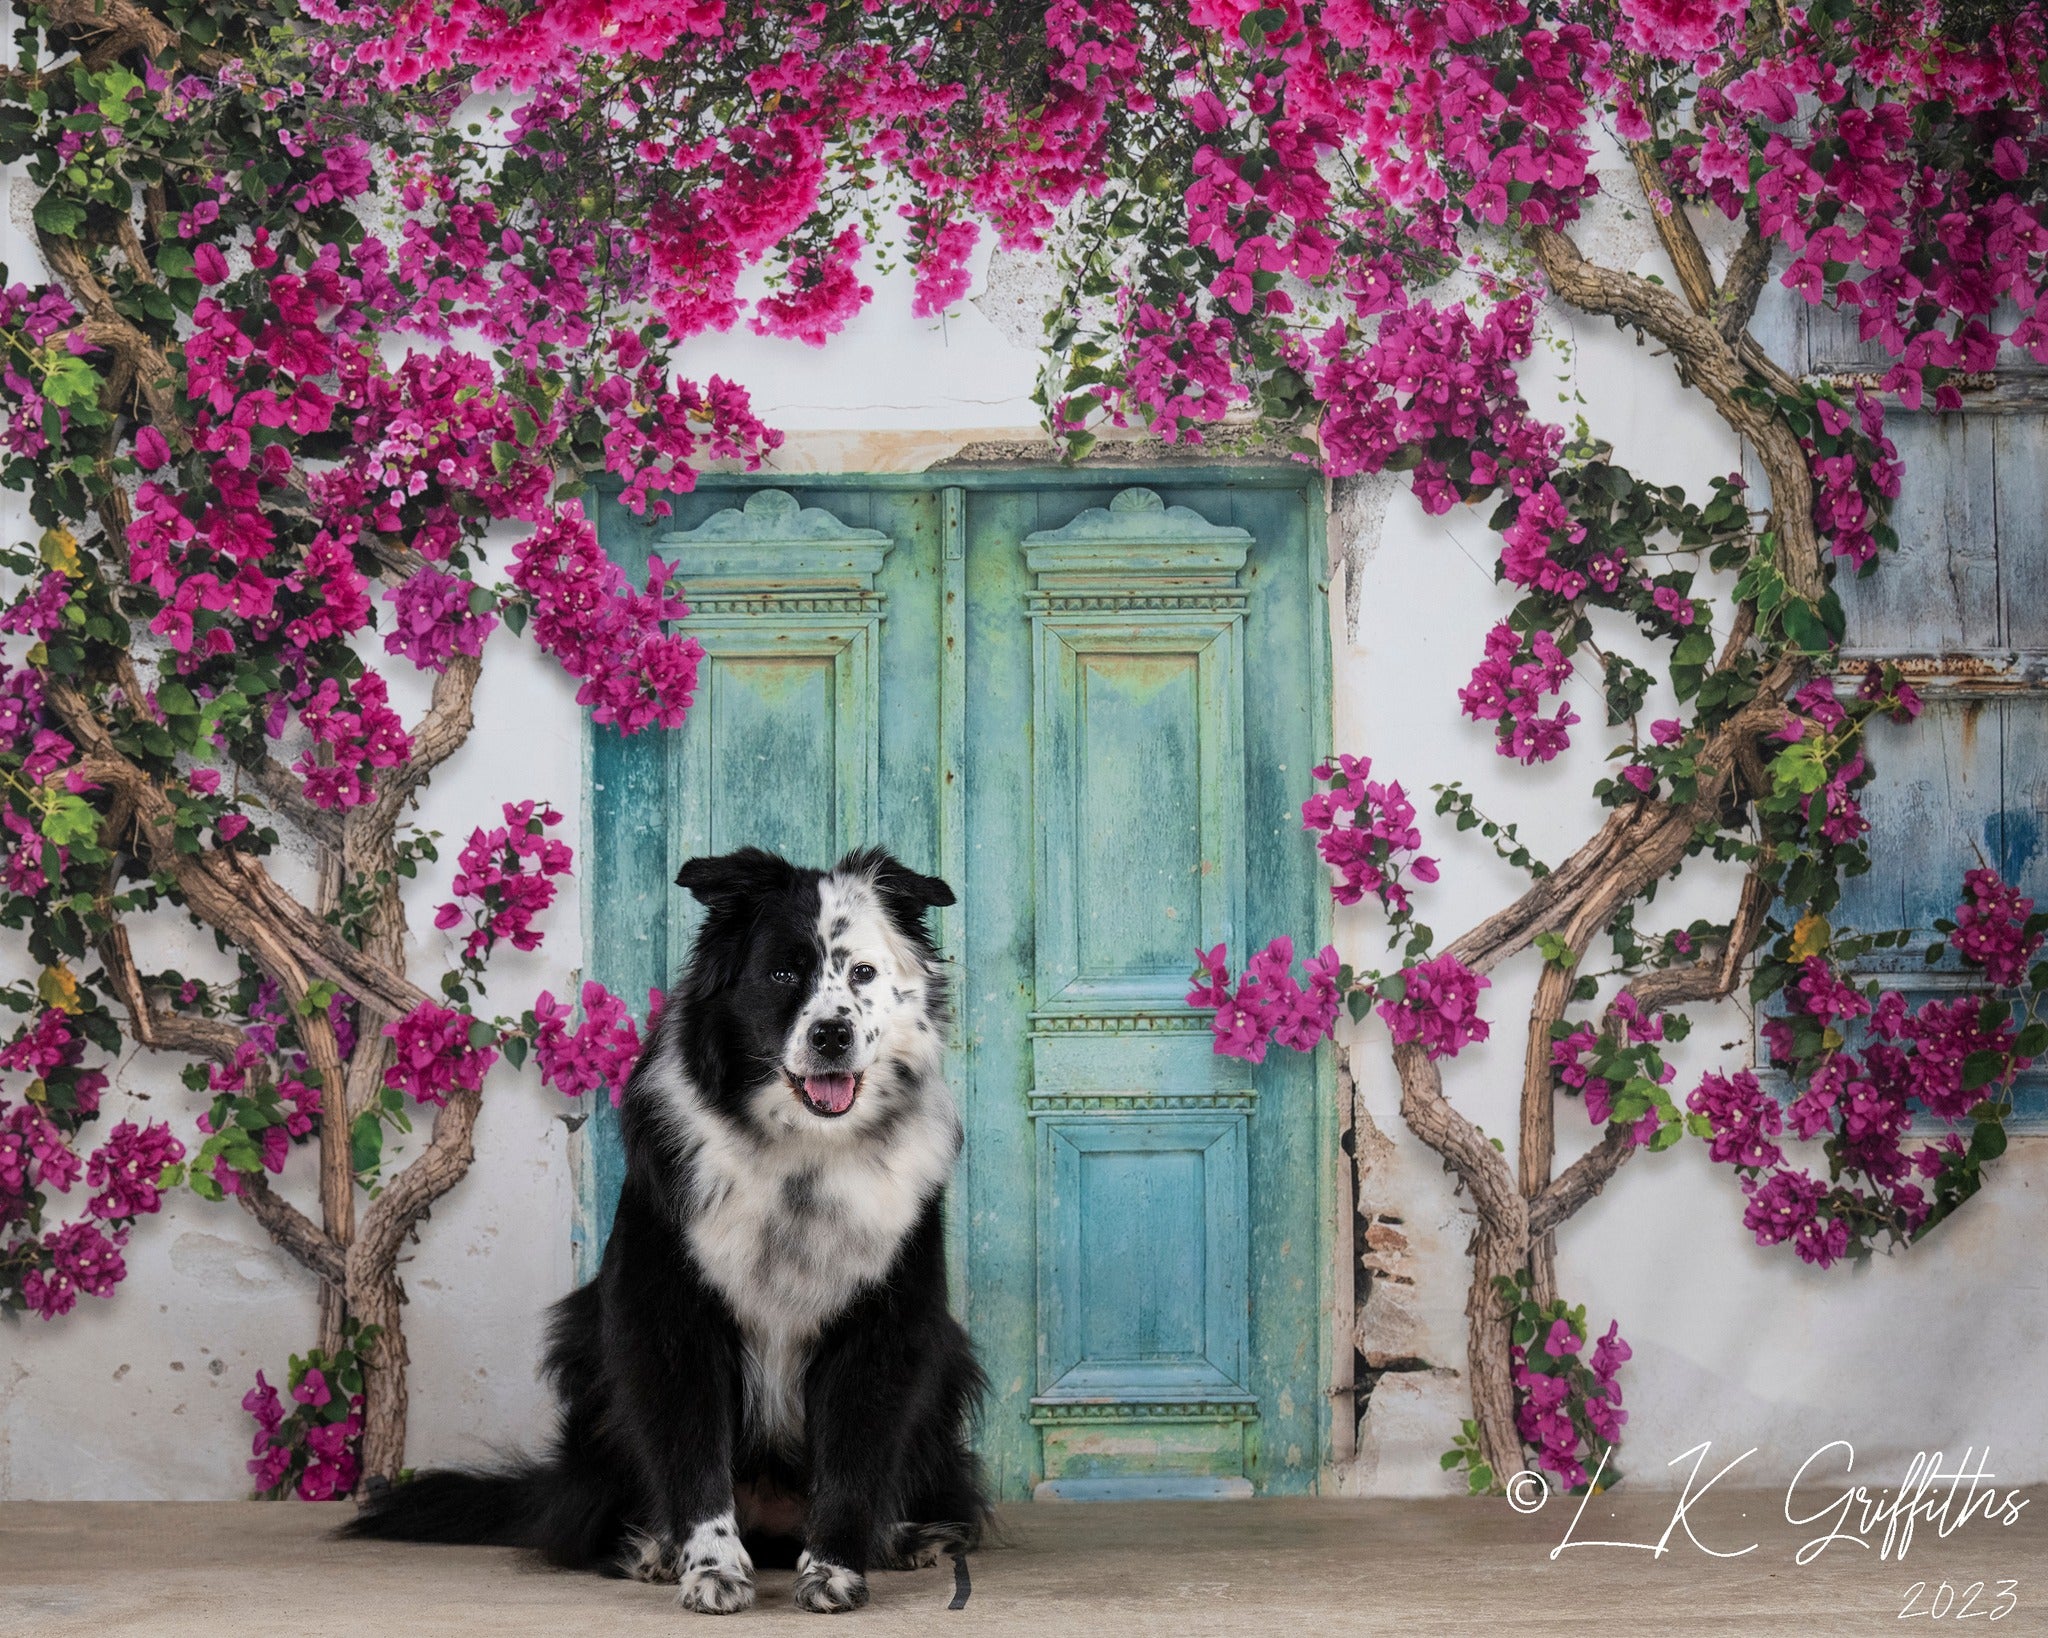 Kate Spring Flowers Door Backdrop Designed by Chain Photography